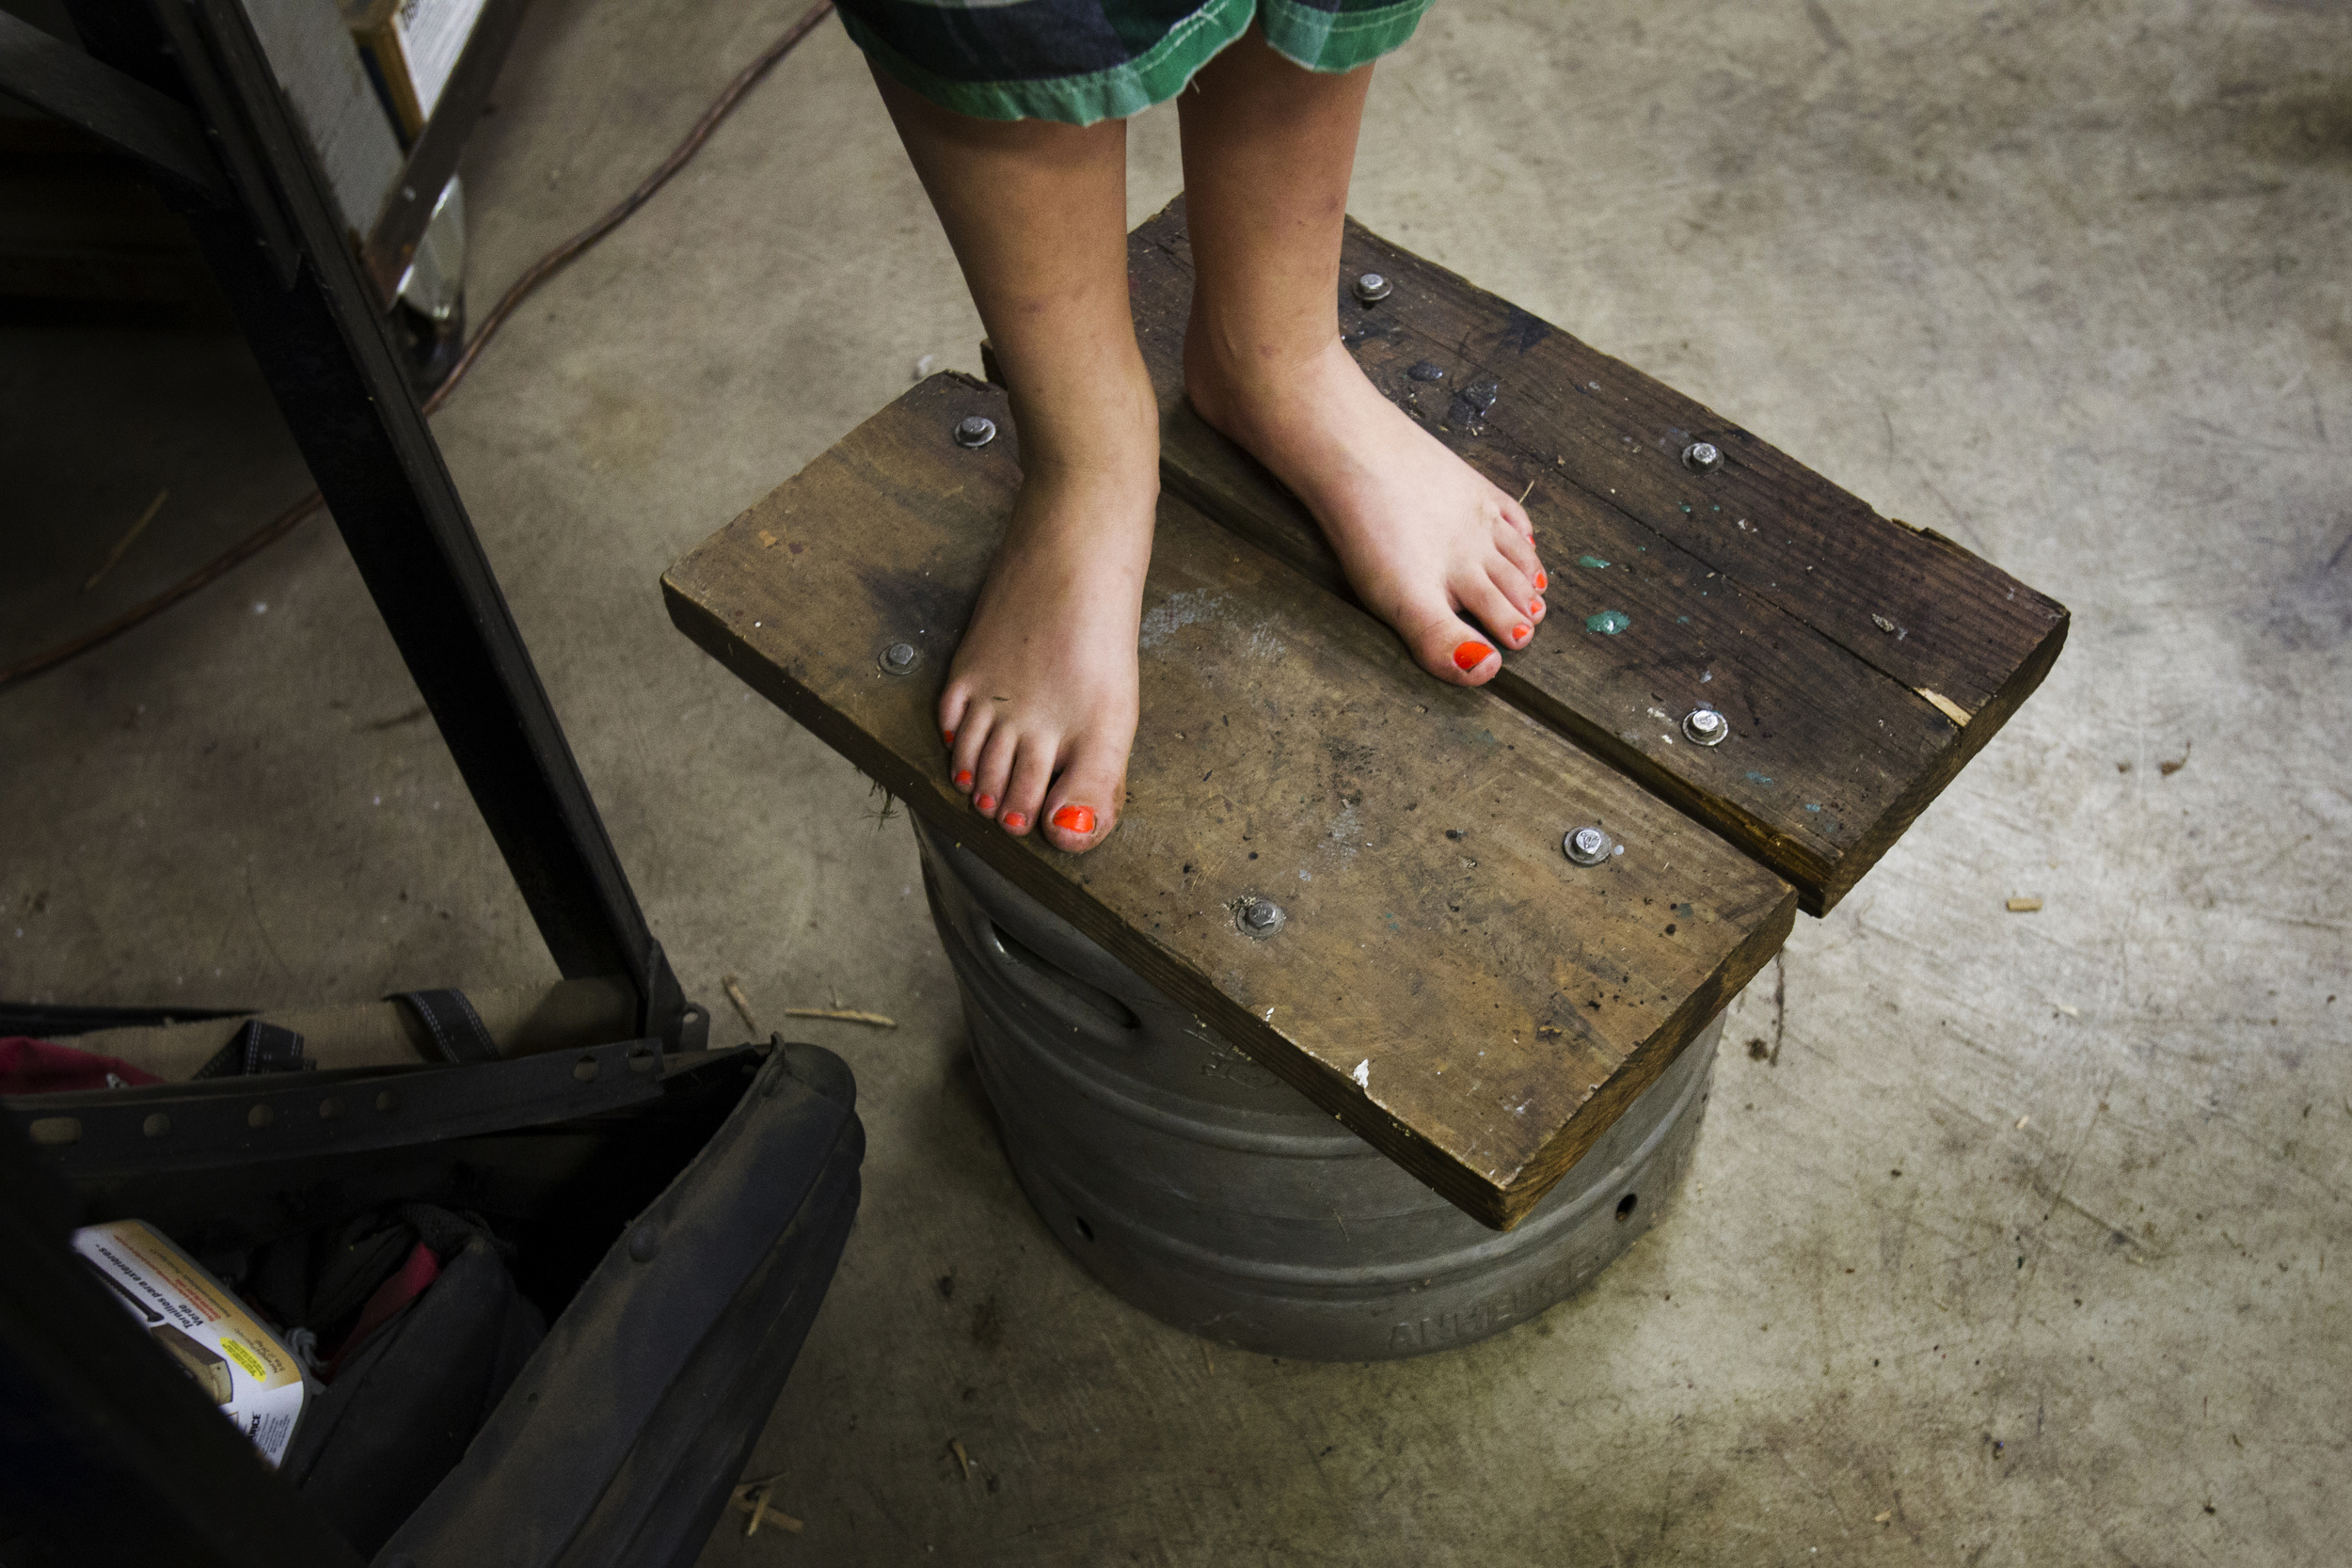  Sydnie Abke, 10, stands barefoot on a bucket in the garage where her father, Russ, stores the family's farm equipment on their property near Pemberville, Ohio.  